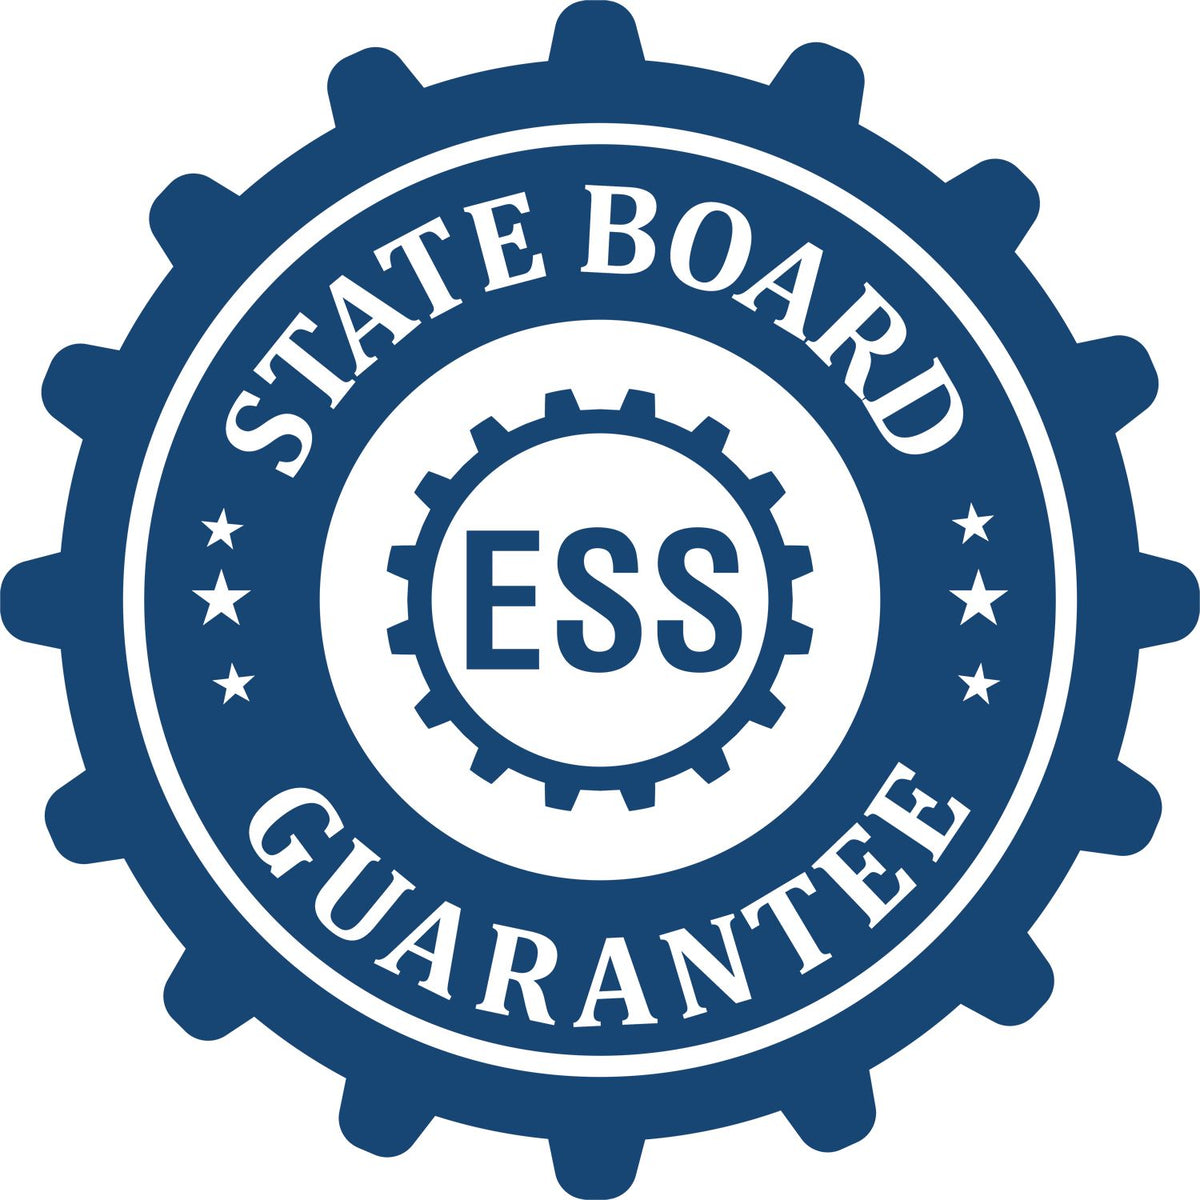 An emblem in a gear shape illustrating a state board guarantee for the Gift Nevada Engineer Seal